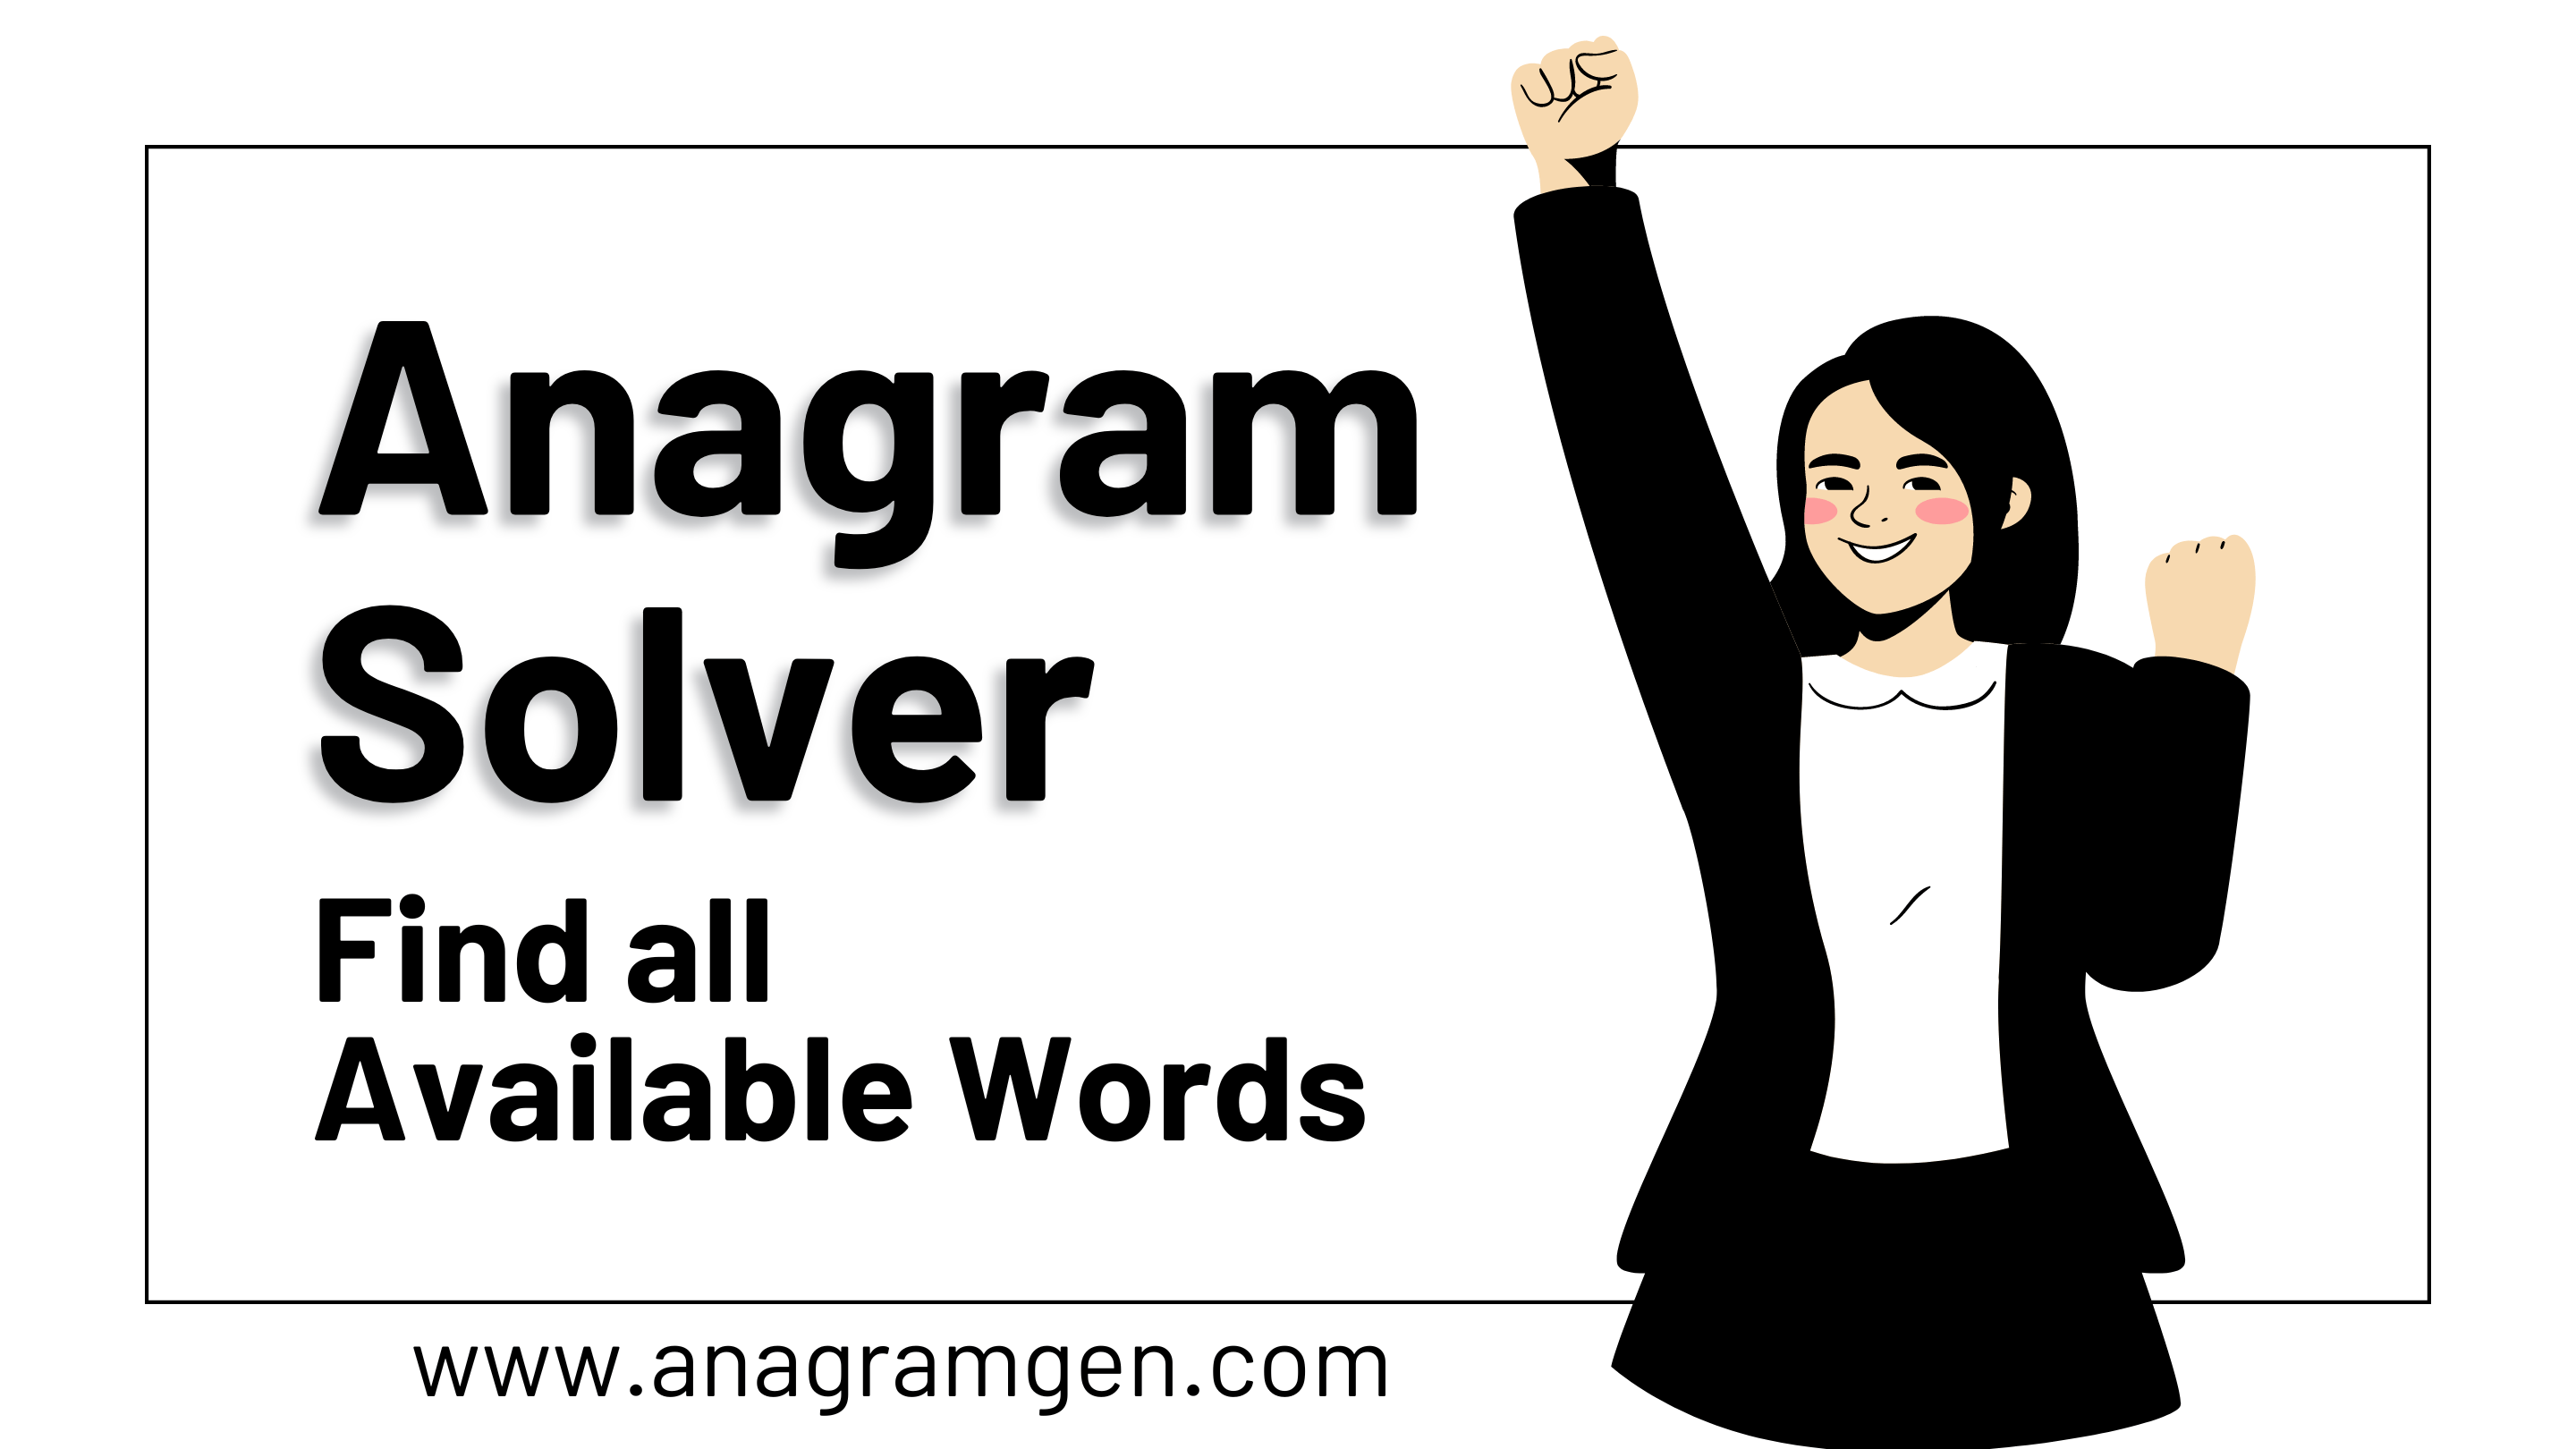 Illustration depicting an anagram solver interface with a search bar and a list of available words.